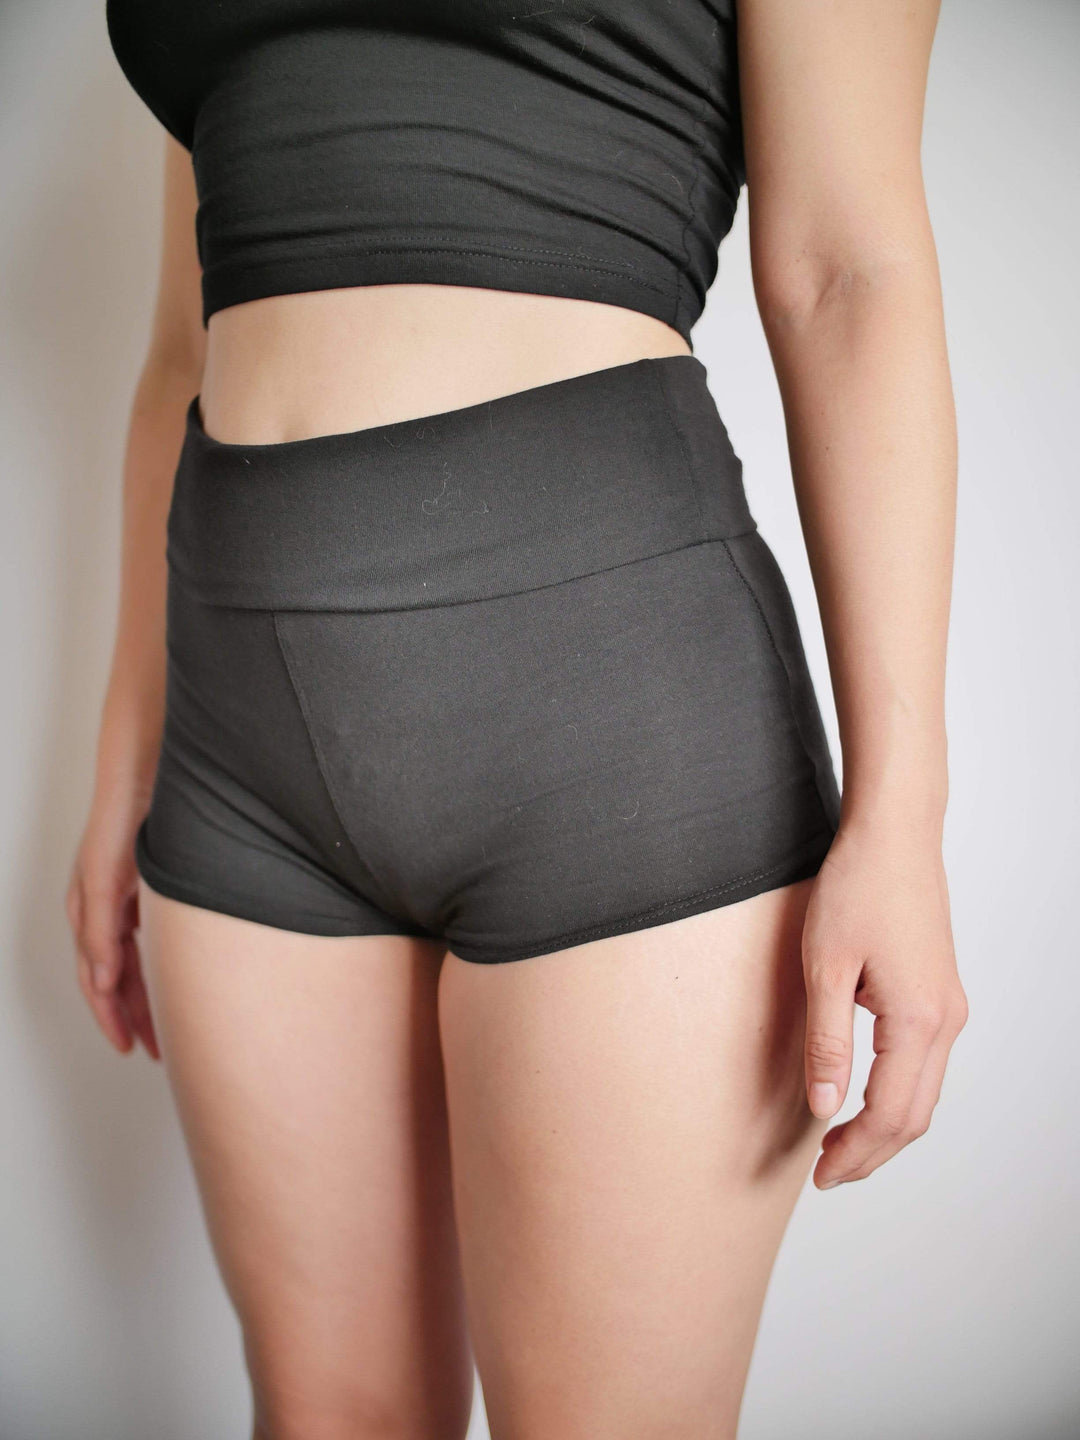 PixelThat Punderwear Yoga Shorts I Only Date Sith Lords Yoga Shorts/Pants